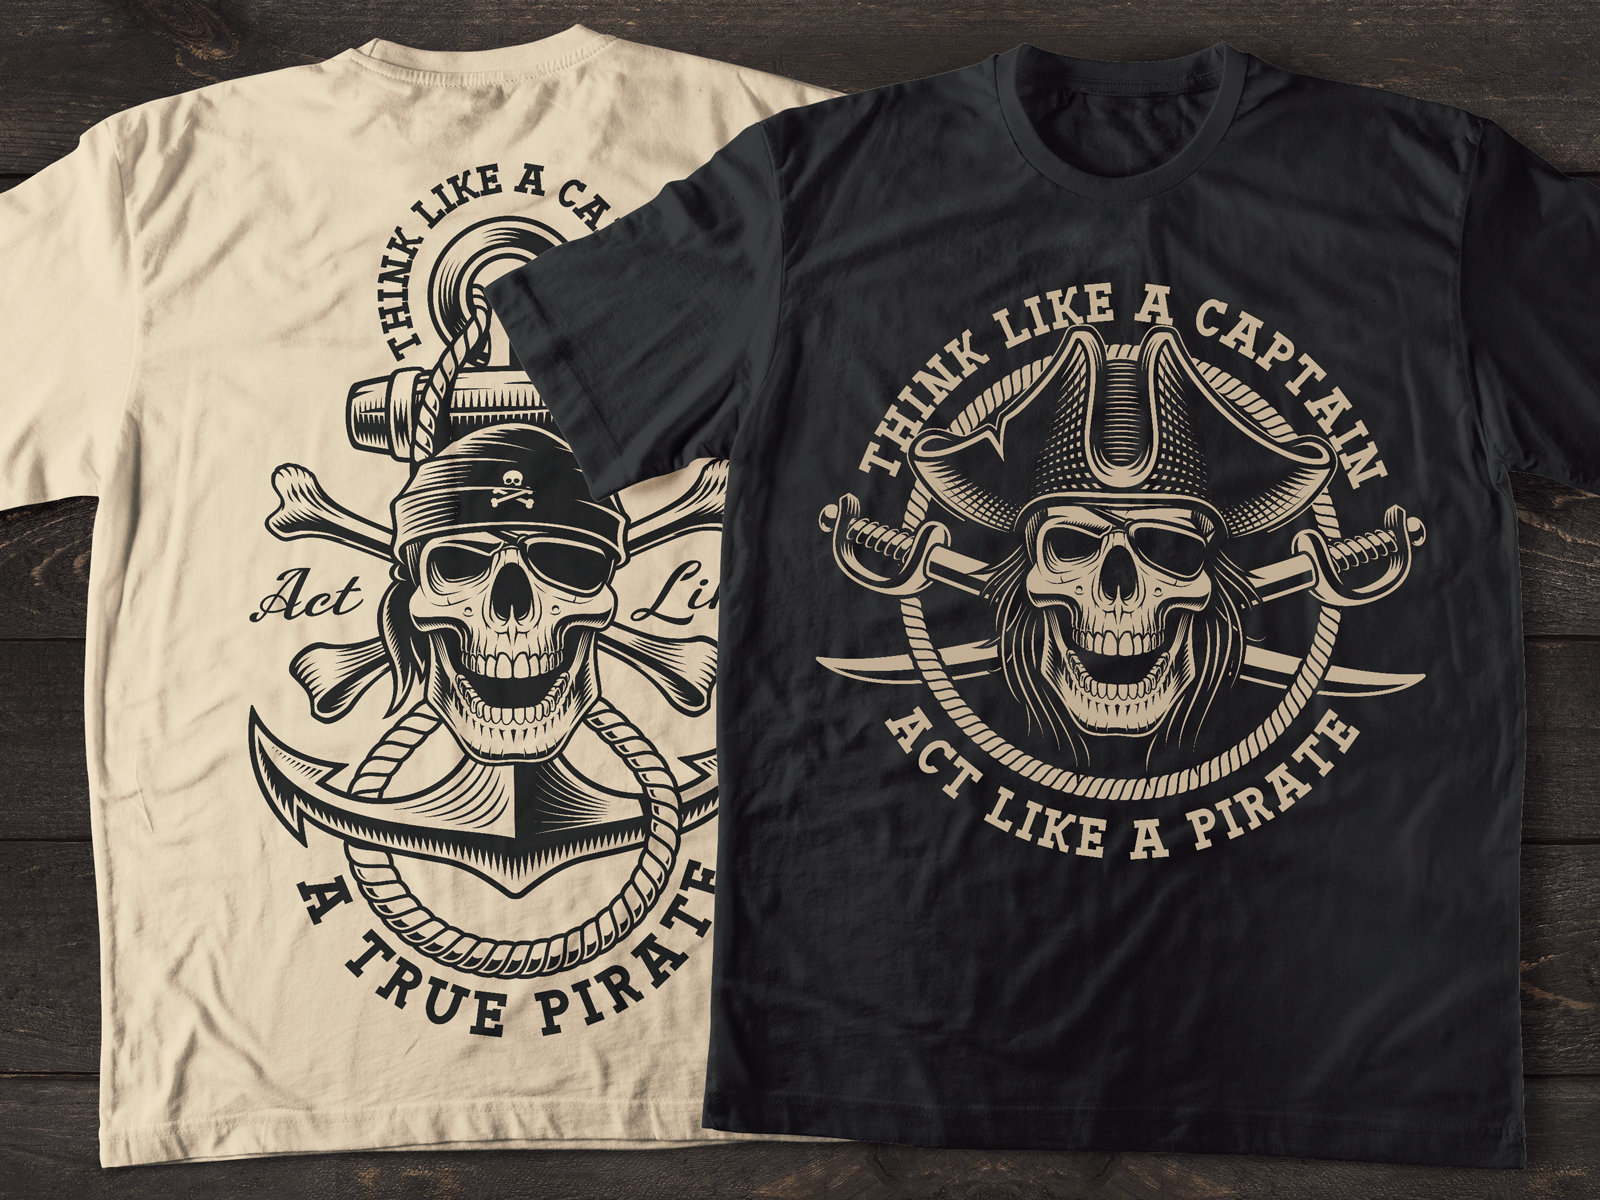 Shirt design with a pirate skull by Natali Shtern on Dribbble